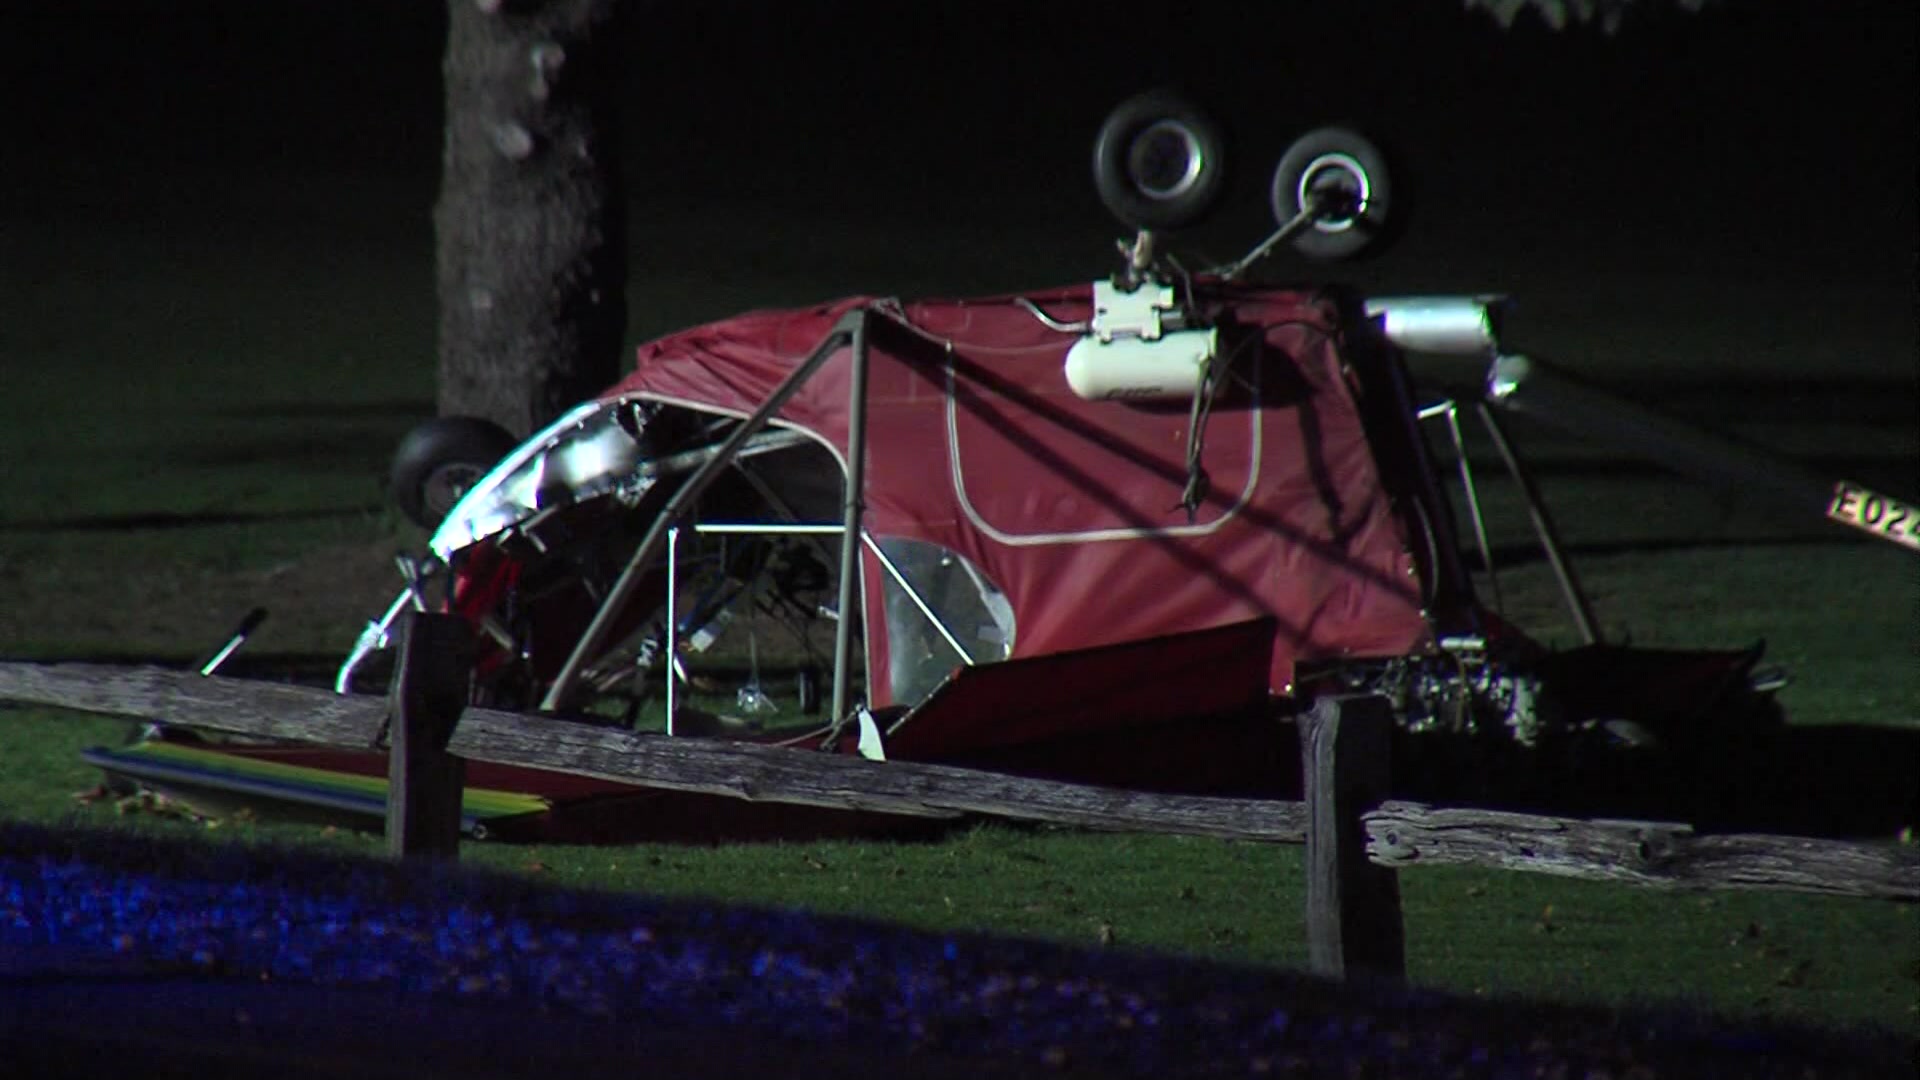 Small plane crashed near golf course